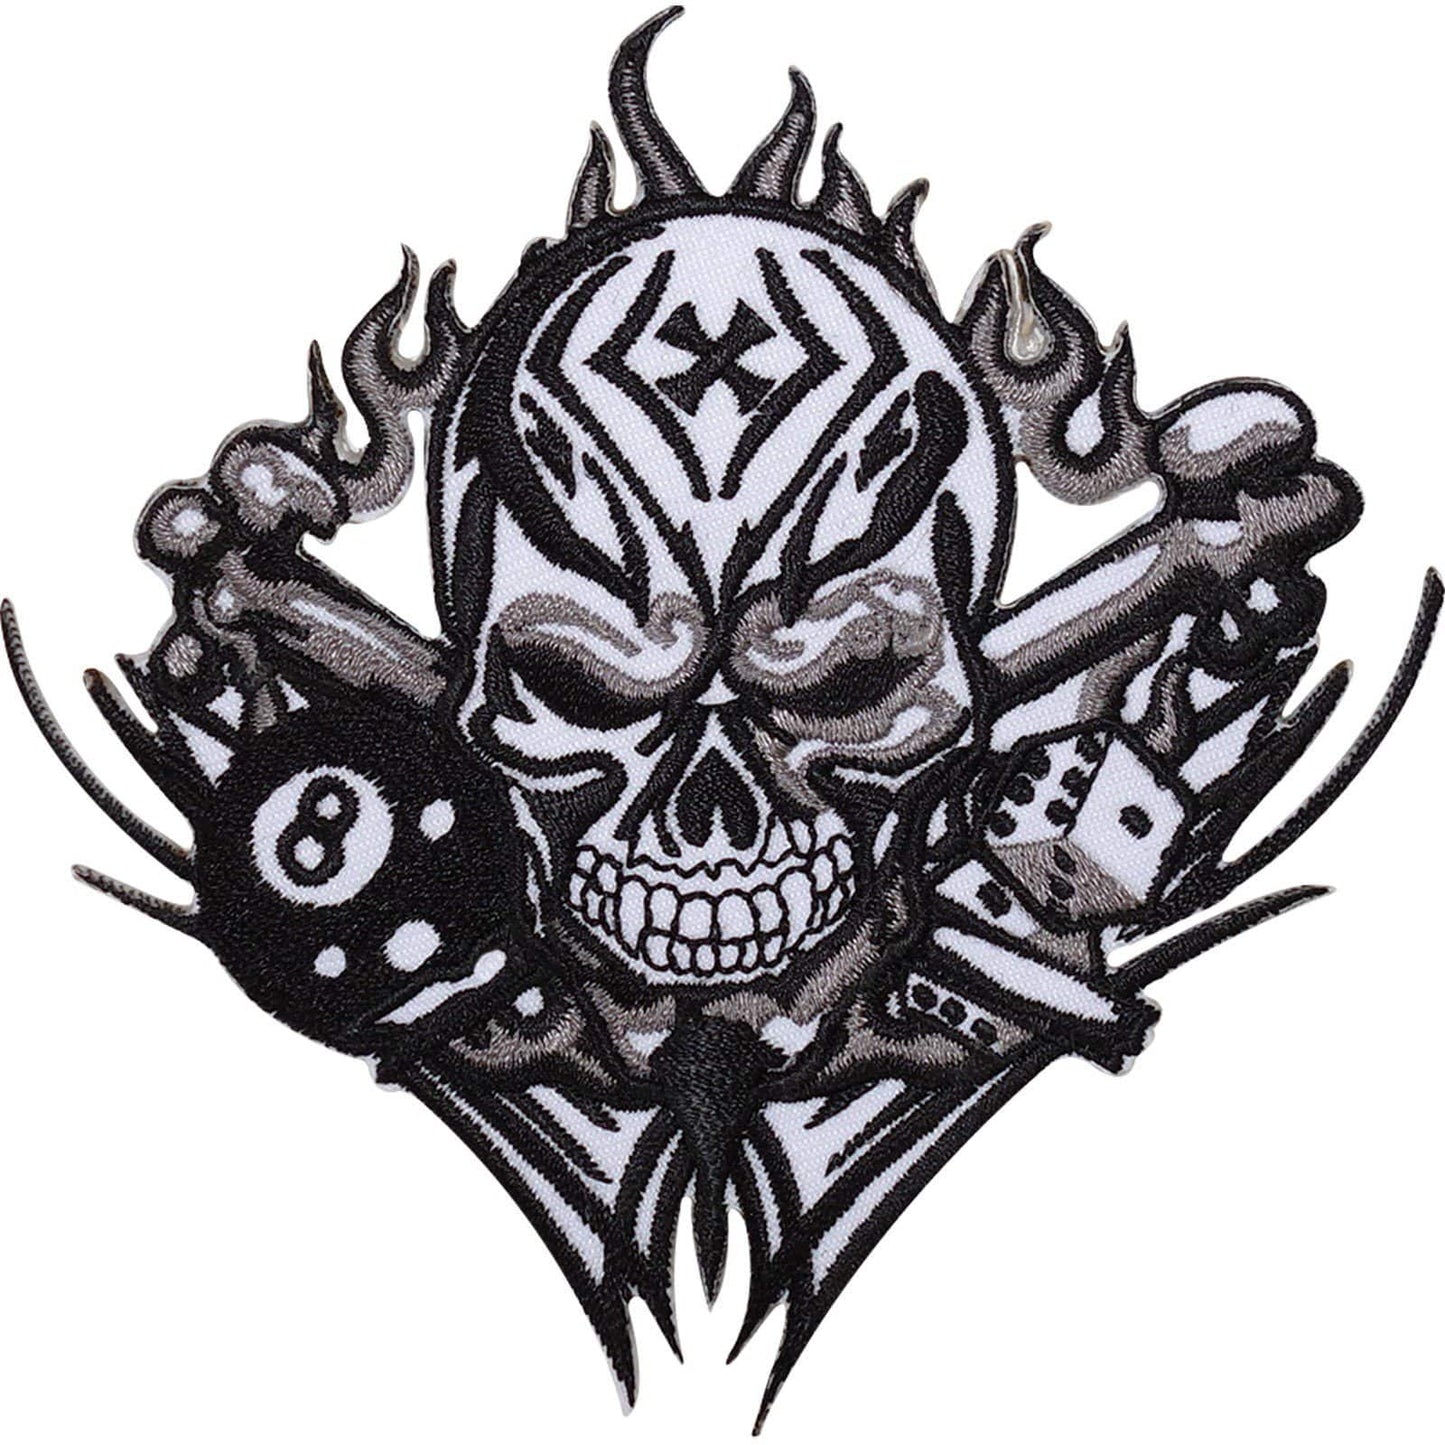 Skull Dice 8 Ball Cross Embroidered Iron / Sew On Patch Motorbike Jacket Badge